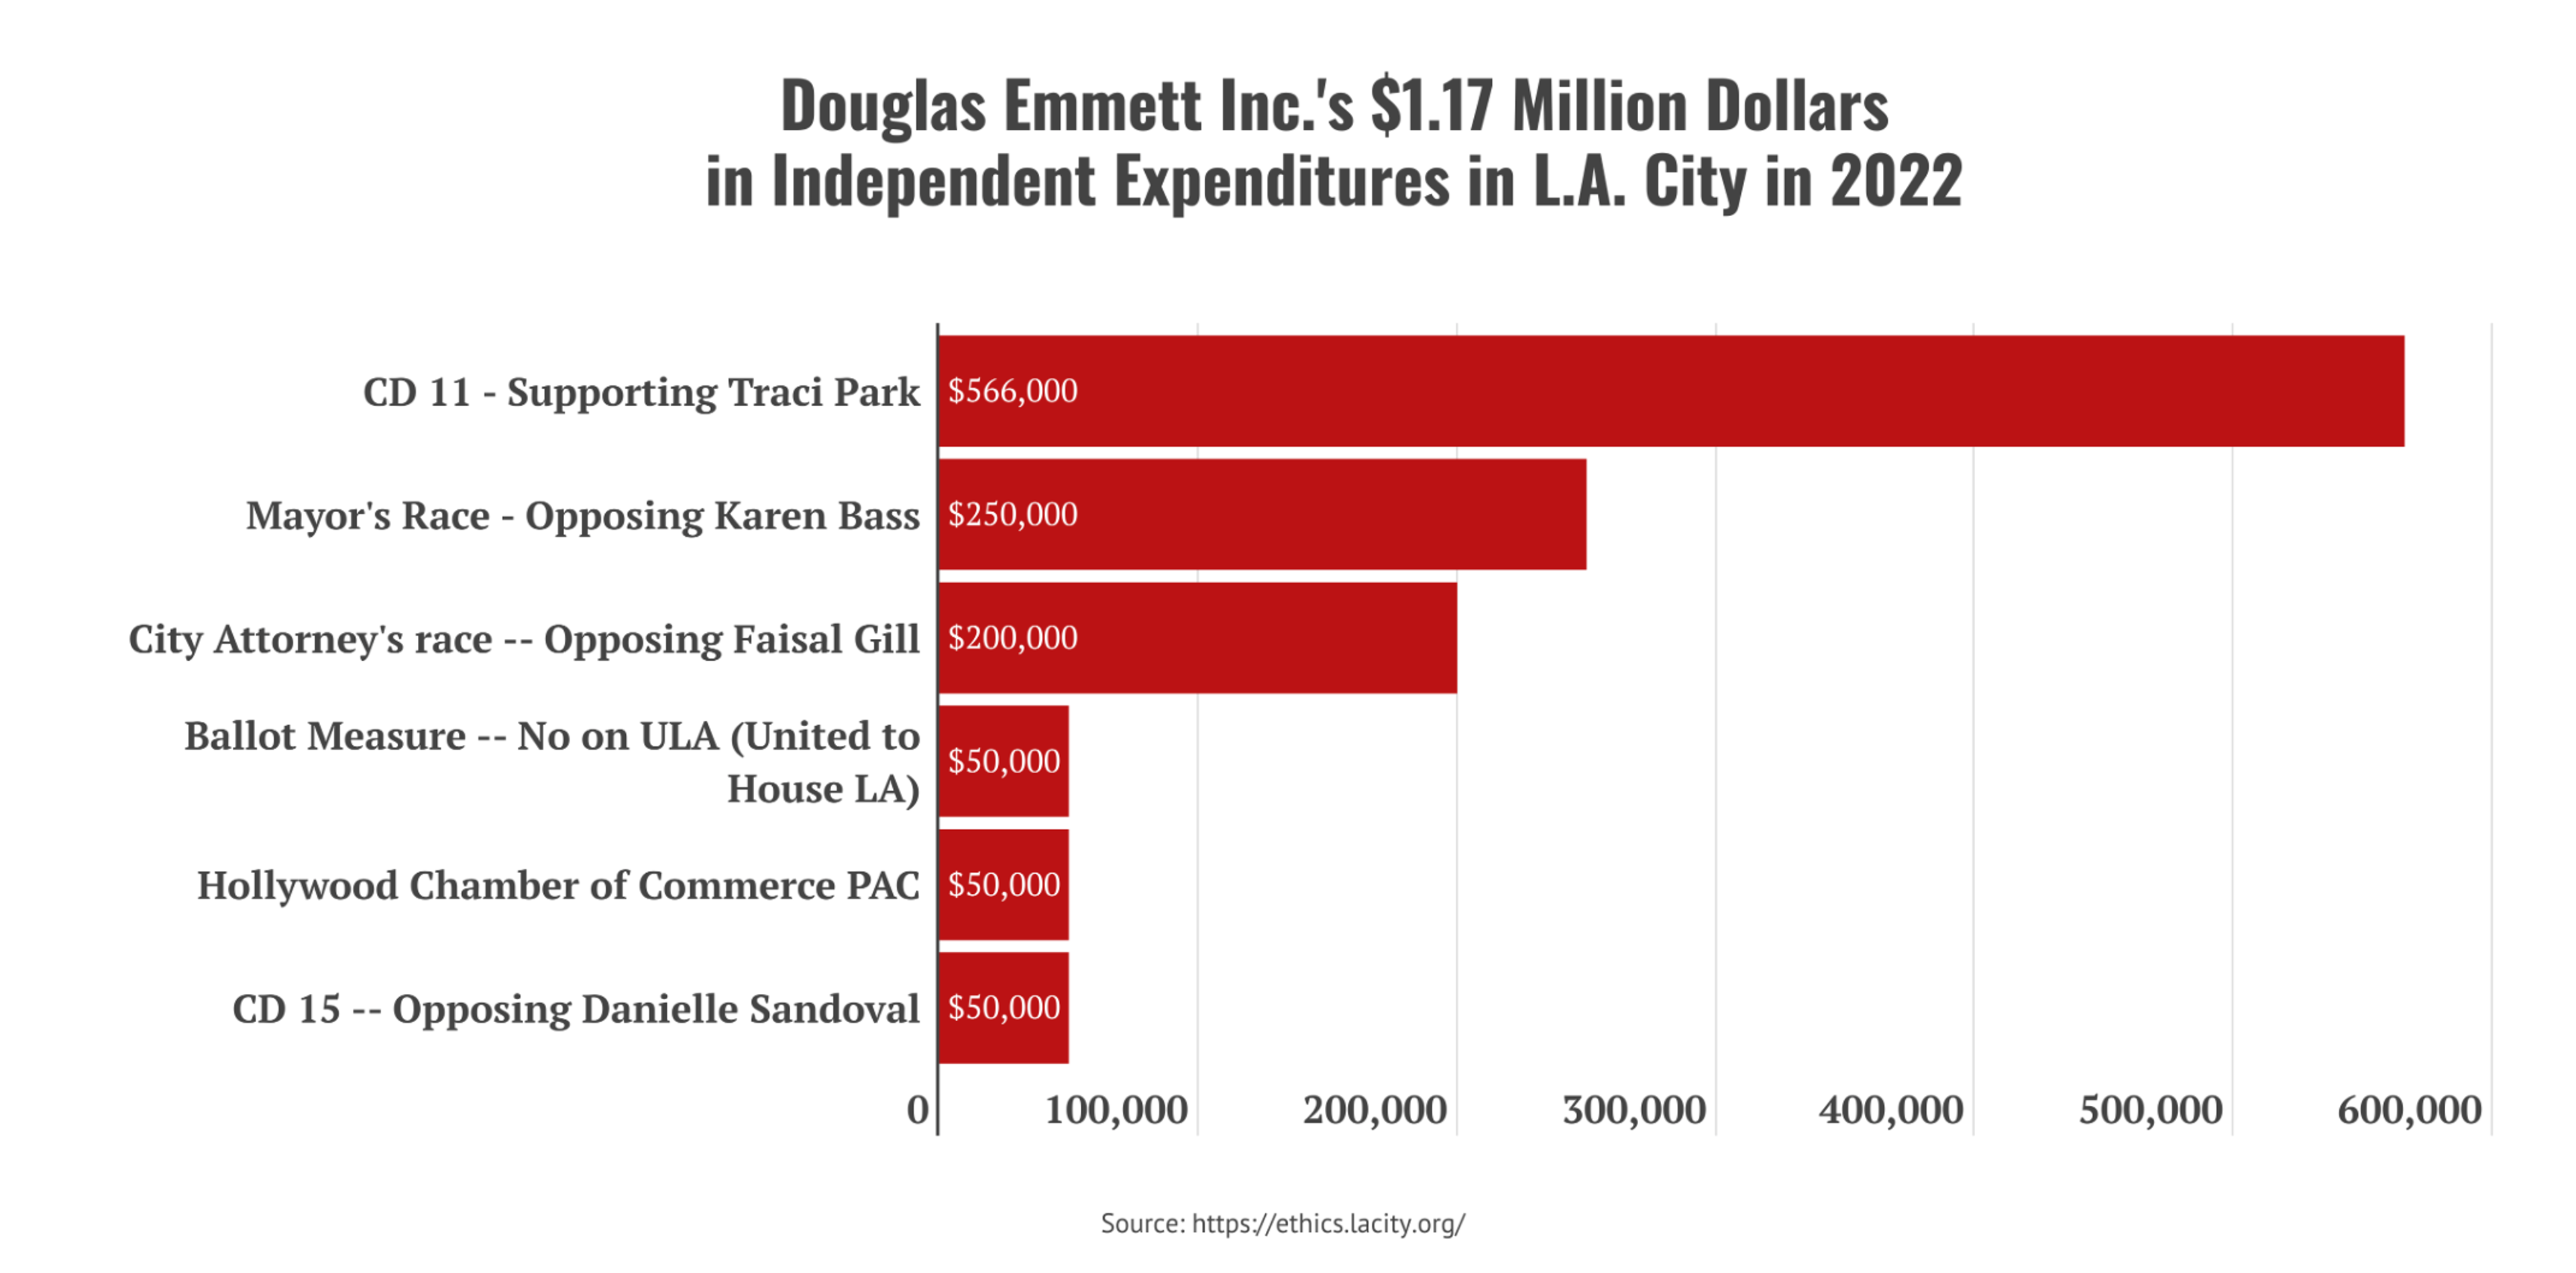 Chart showing Douglas Emmett Inc.'s political expenditures: $566,000 for Traci Park, $250,000 opposing Karen Bass, $200,000 opposing Faisal Gill, $50,000 against Measure ULA, $50,000 to the Hollywood Chamber of Commerce PAC, and $50,000 opposing Danielle Sandoval. 